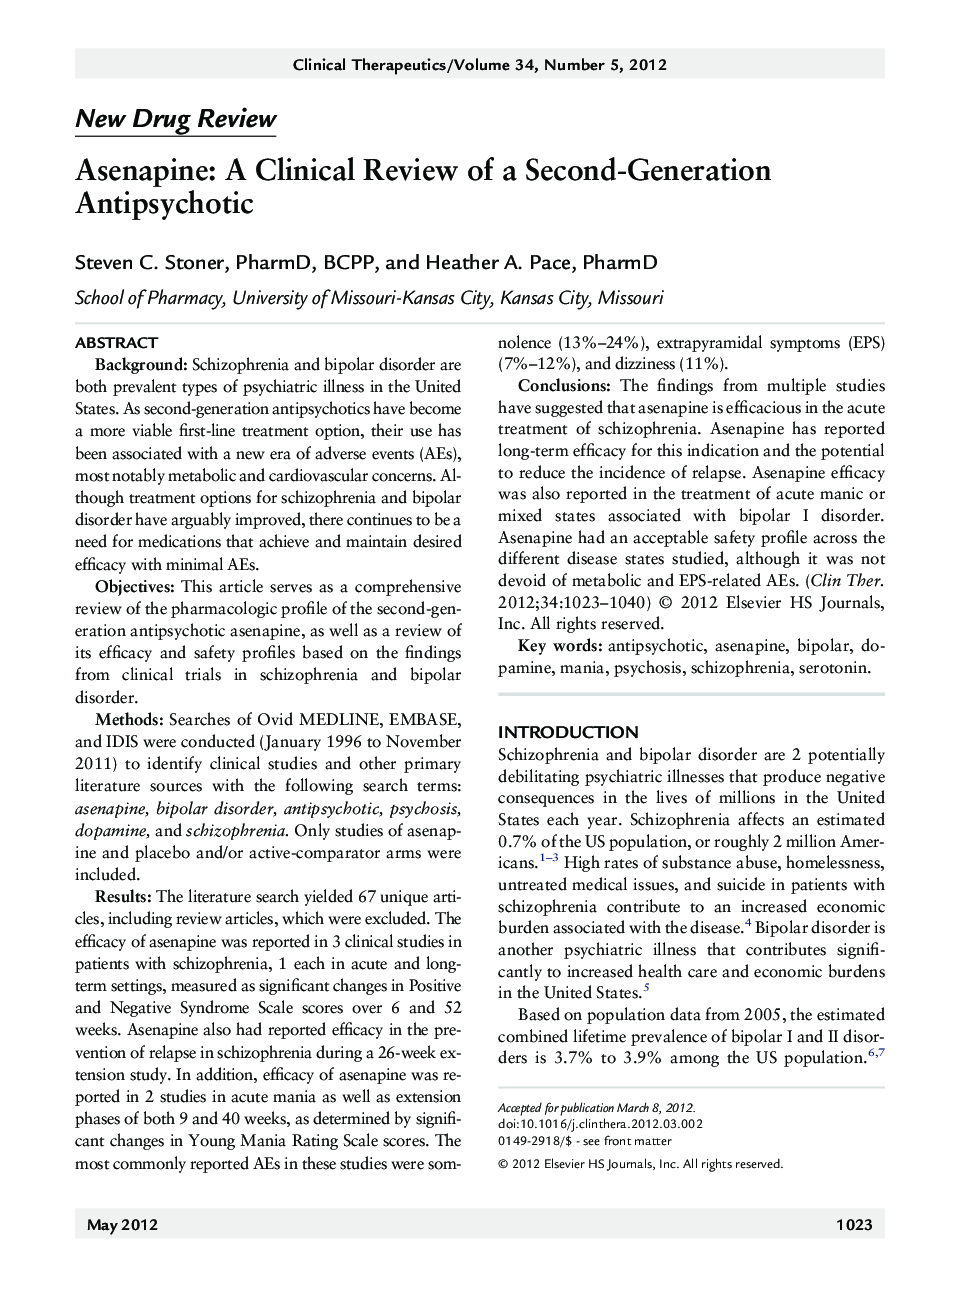 Asenapine: A Clinical Review of a Second-Generation Antipsychotic